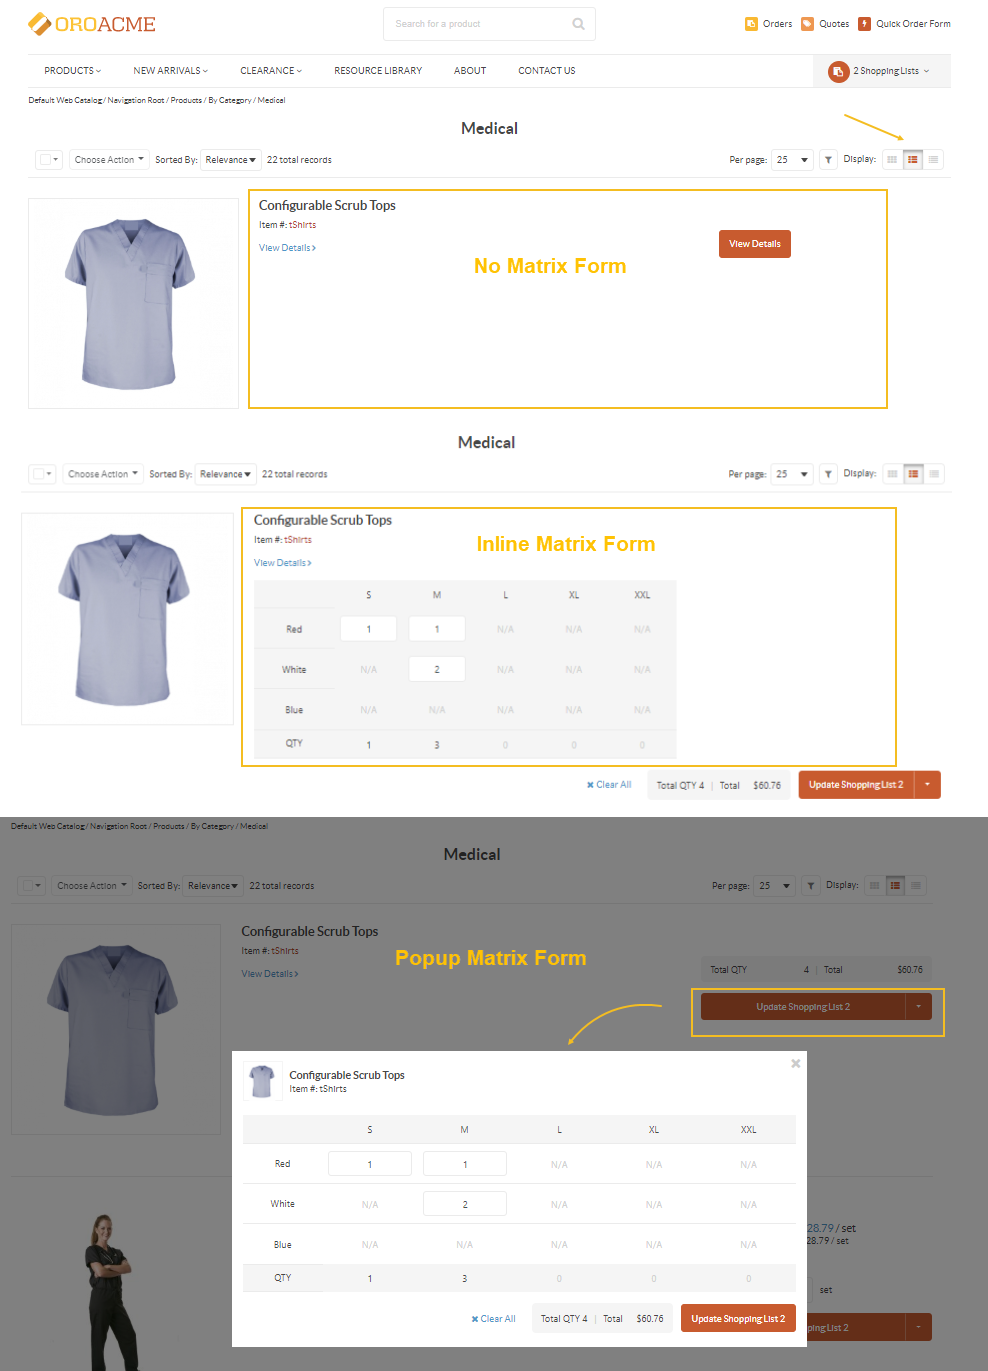 Different matrix form view options displayed on the product listing page in the storefront